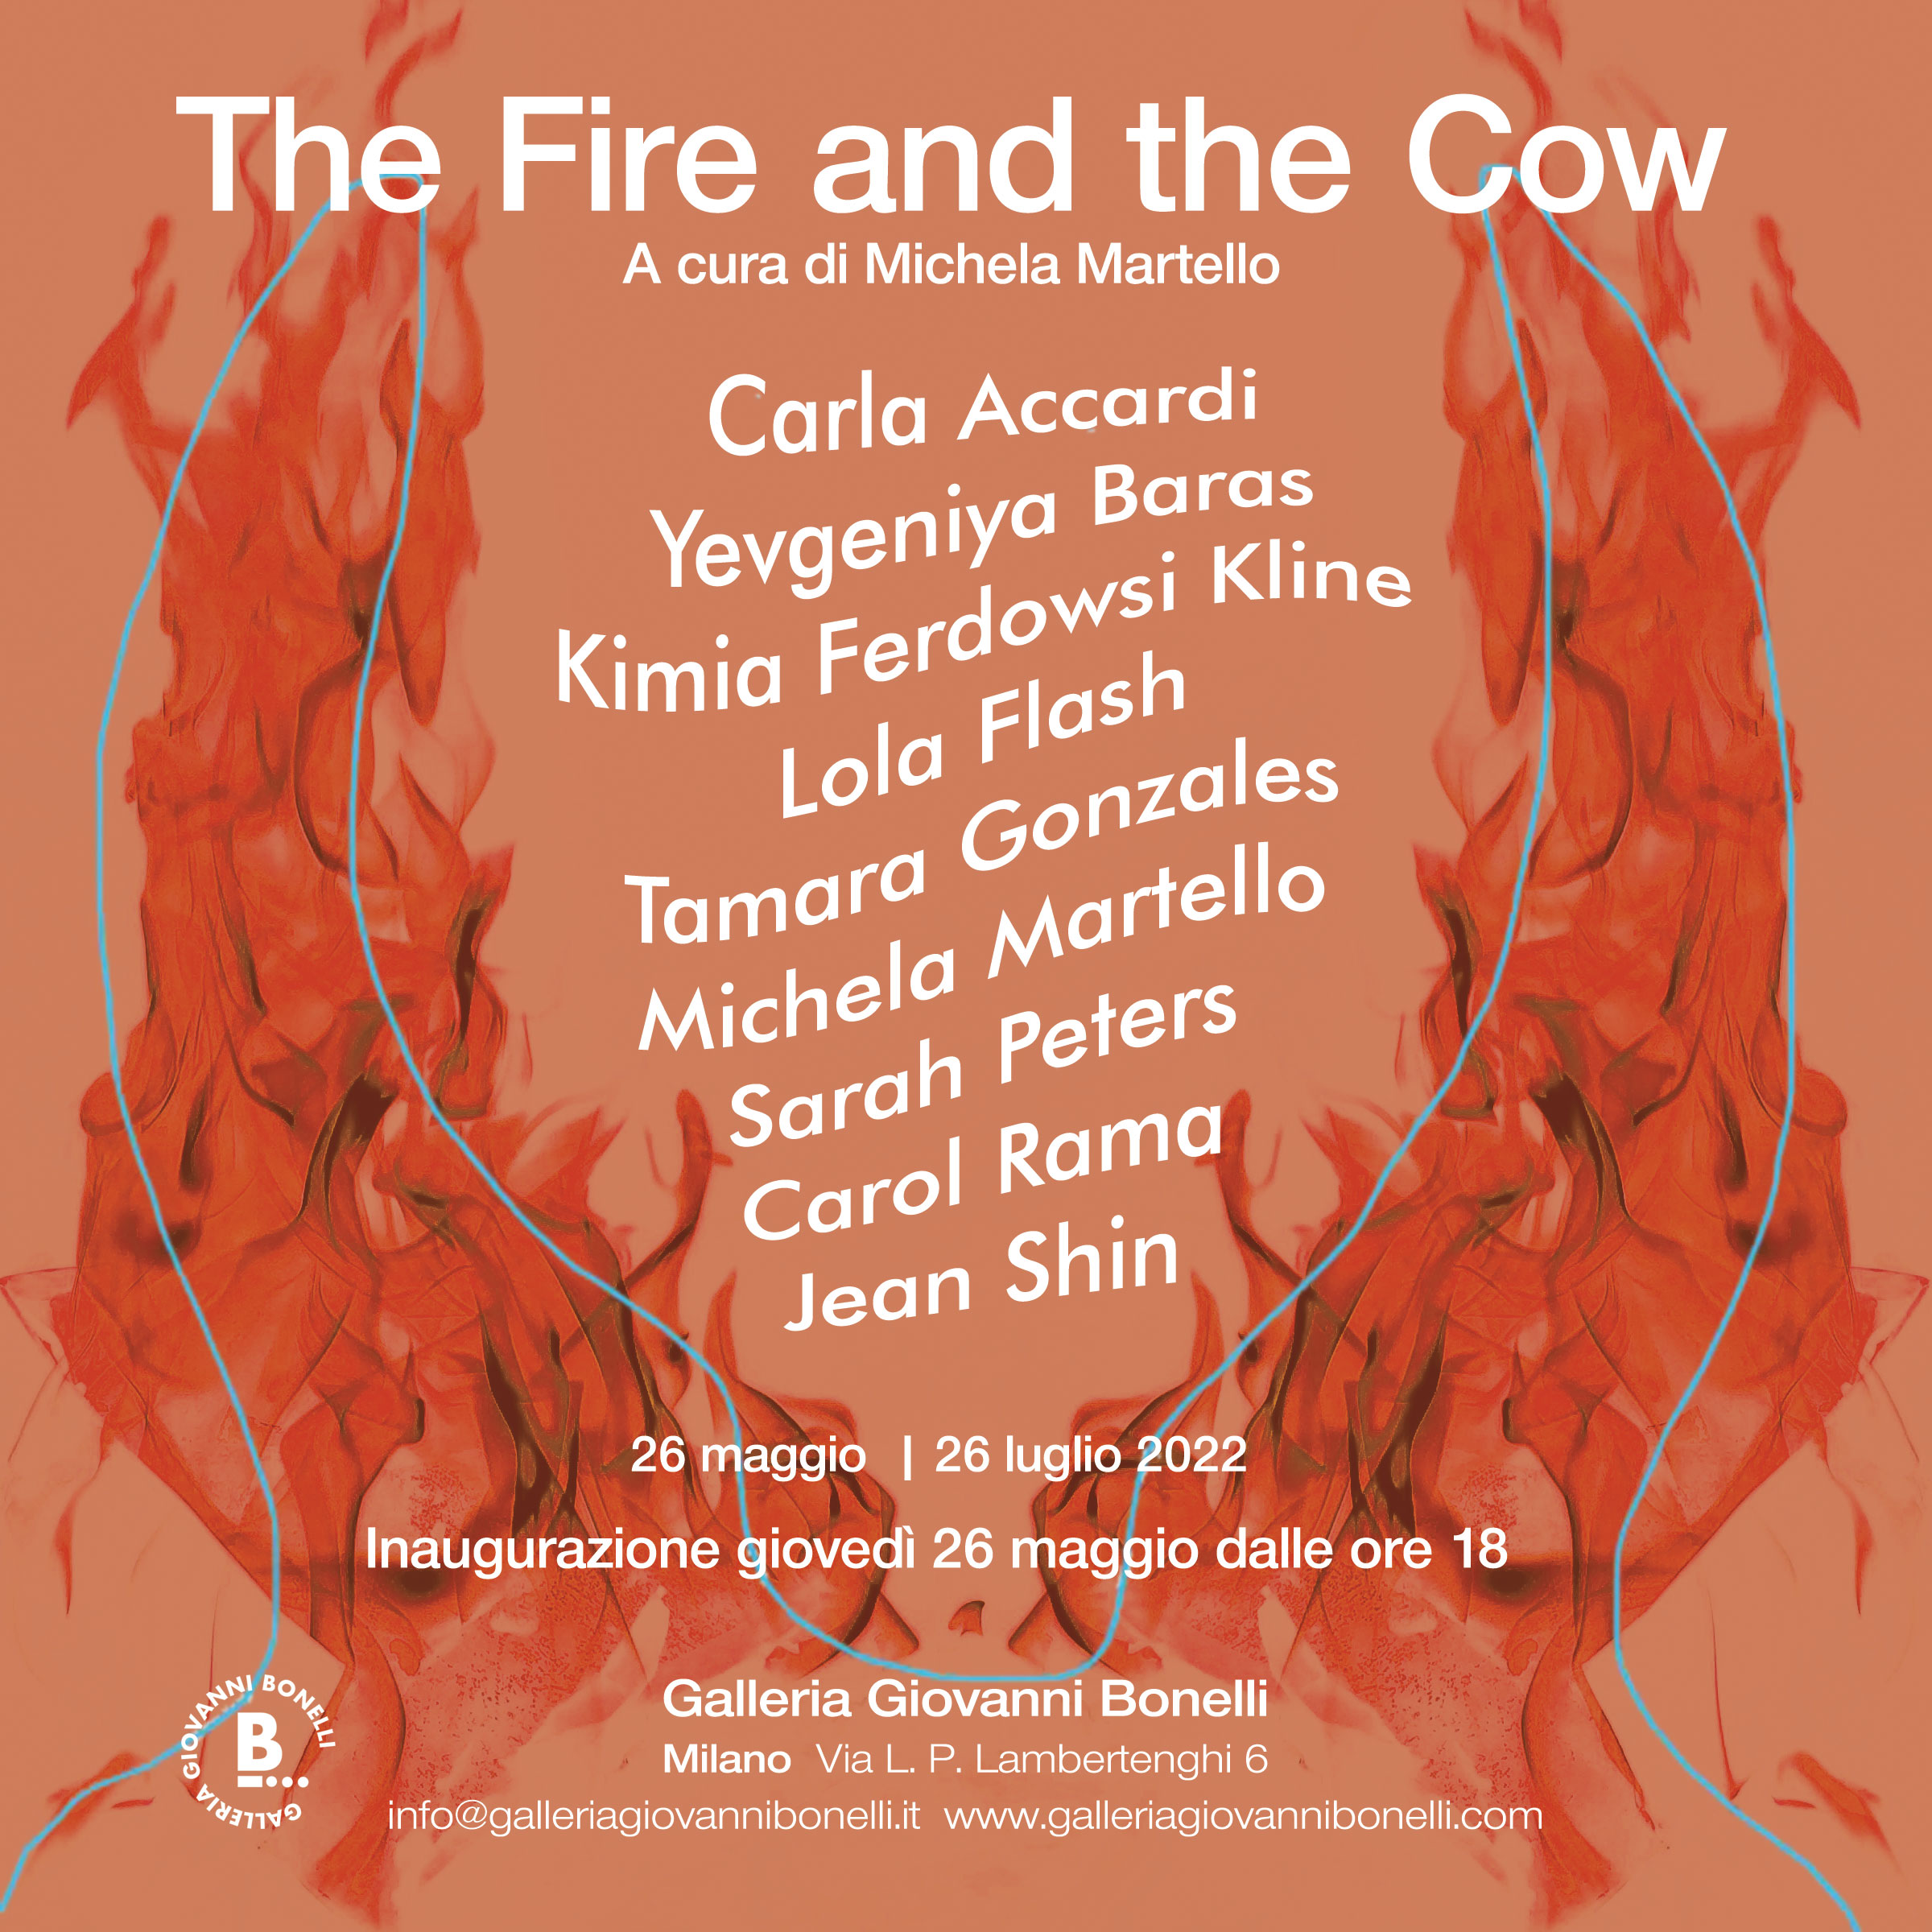 The Fire and the Cow